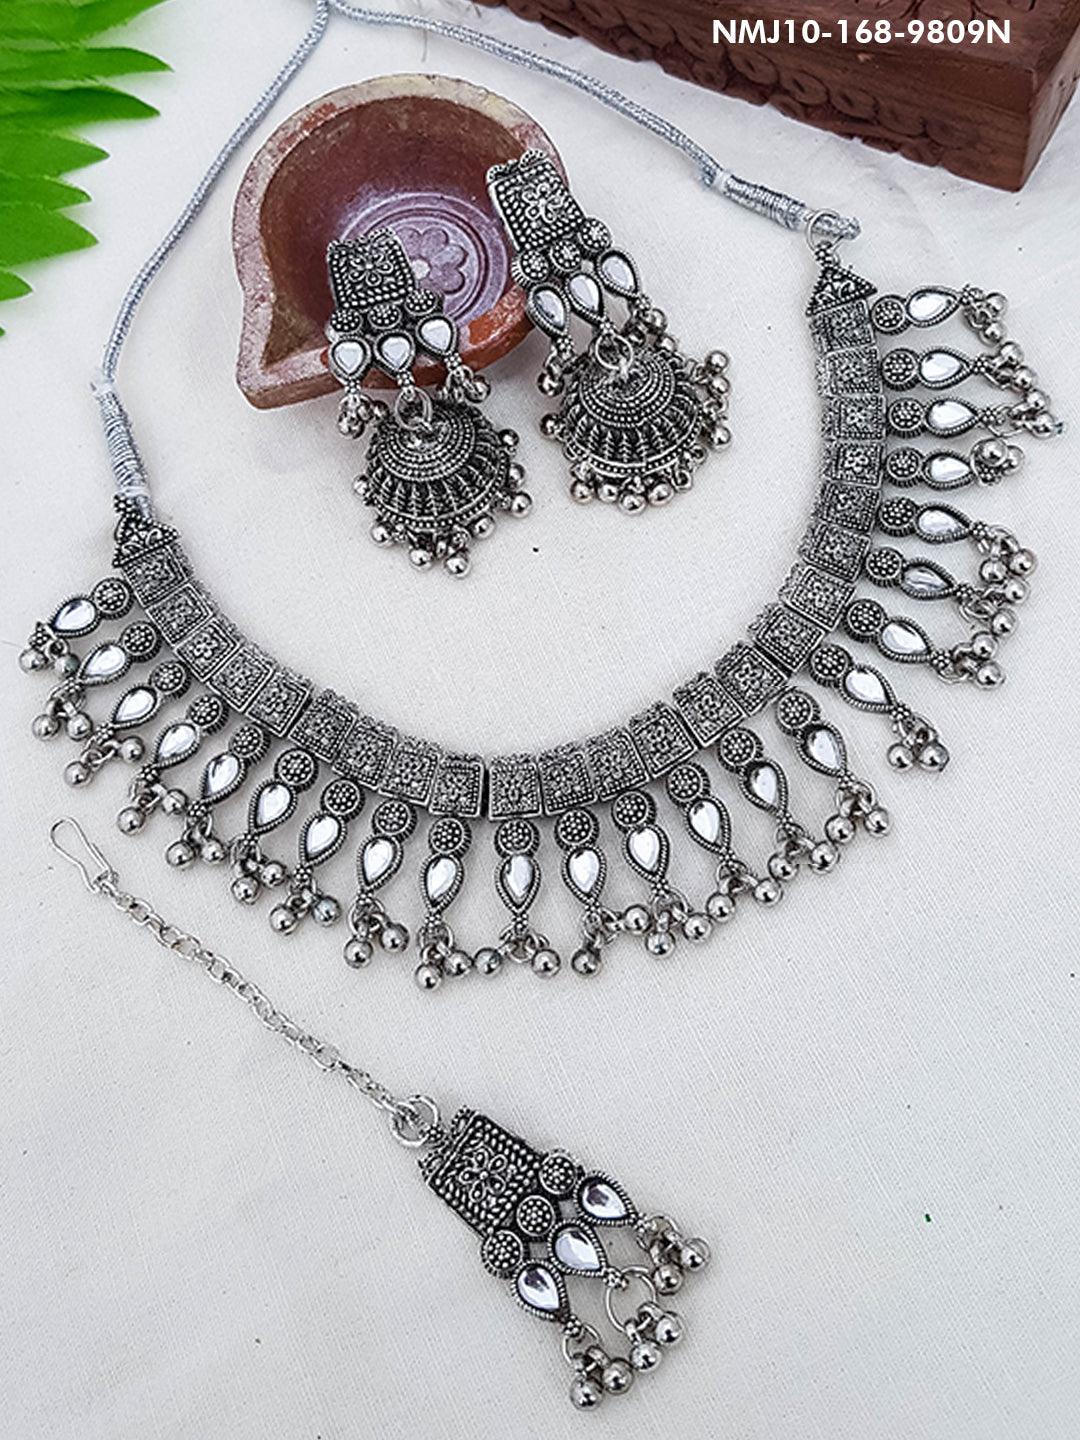 Silver Oxidised Exclusive Designer Necklace Set for special occasion 9809N - Griiham